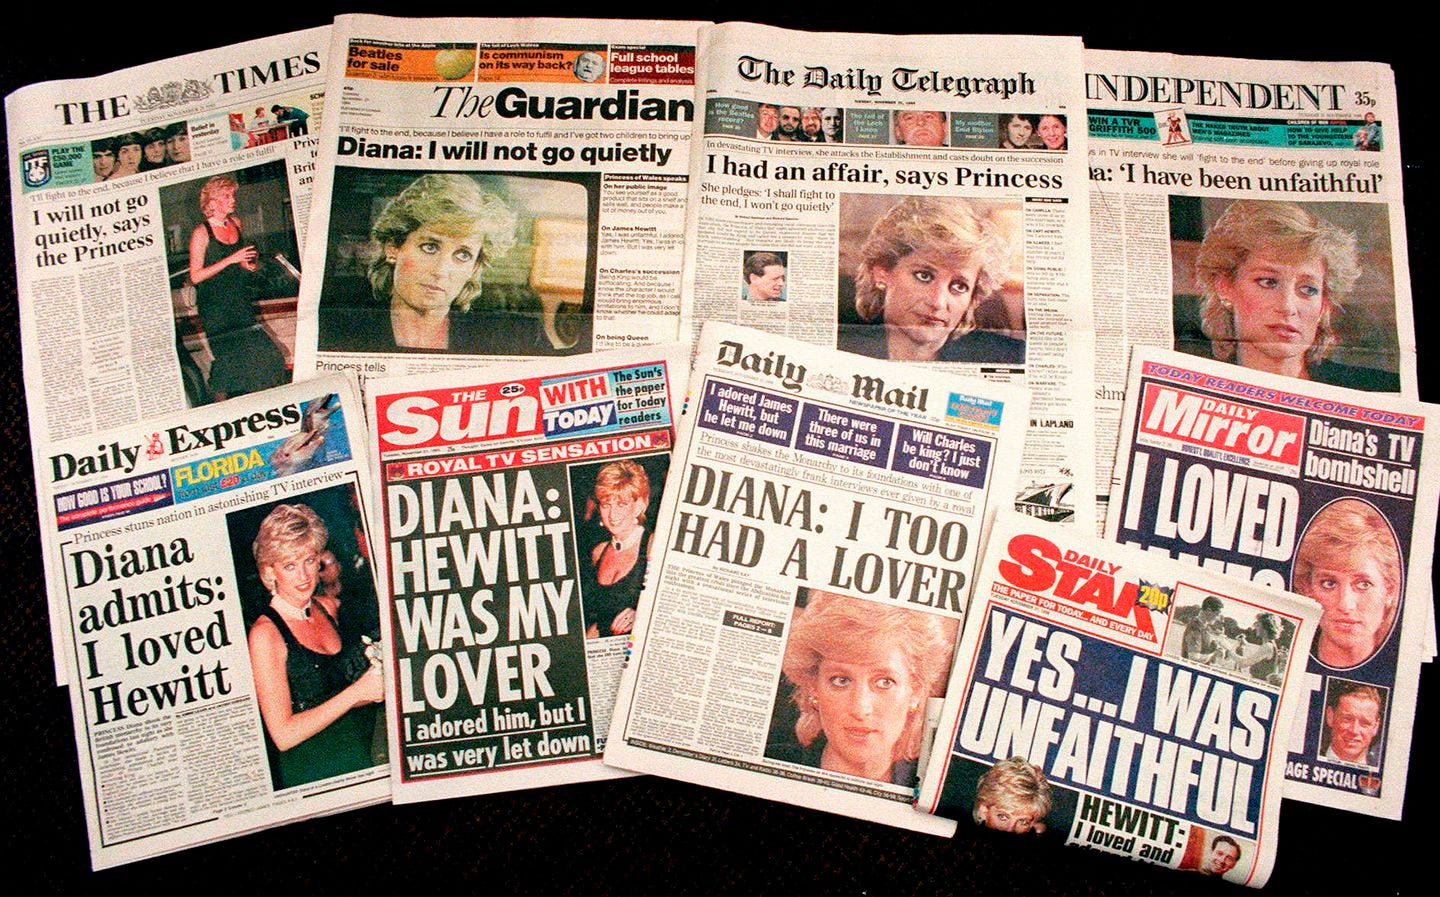 In this Nov. 21, 1995 photo a selection of front pages of most of Britains's national newspapers showing their reaction to Princess Diana's television interview with BBC journalist Martin Bashir. Prince William and his brother Prince Harry have issued strongly-worded statements criticizing the BBC and British media for unethical practices after an investigation found that Bashir used "deceitful behavior" to secure Princess Diana's most explosive TV interview in 1995.